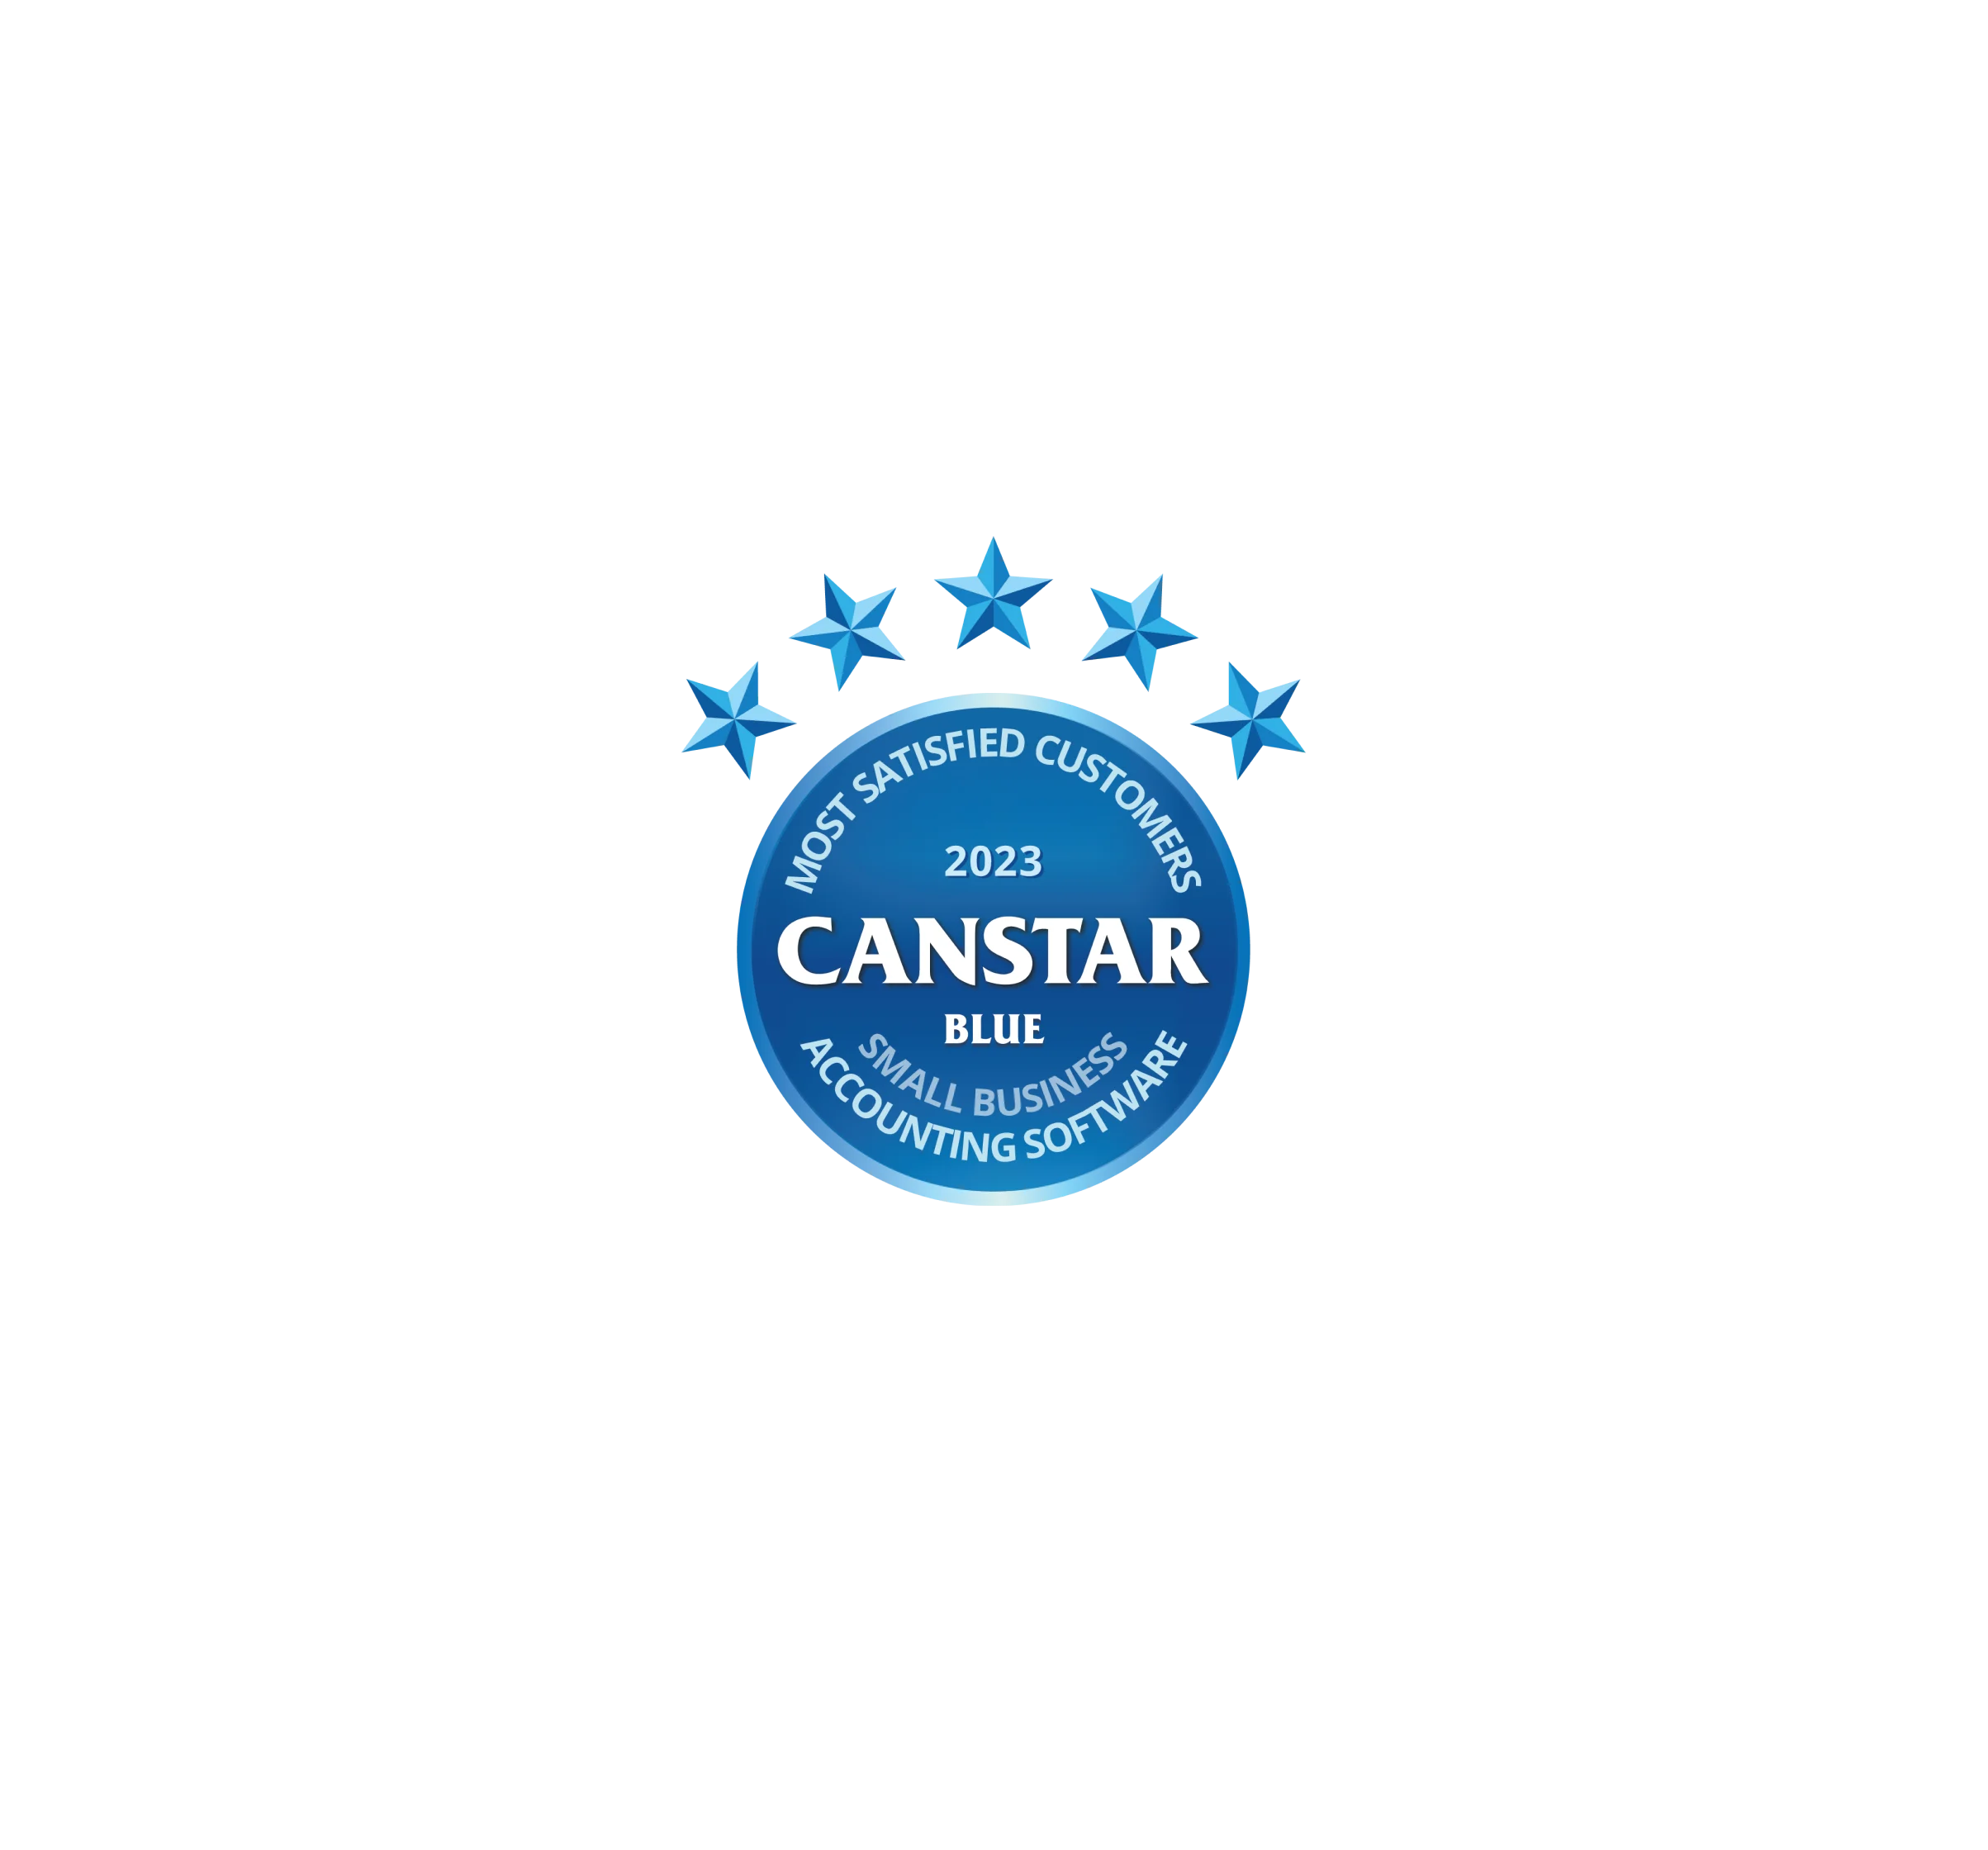 A Canstar Blue awards badge for Most Satisfied Customers, 2023.